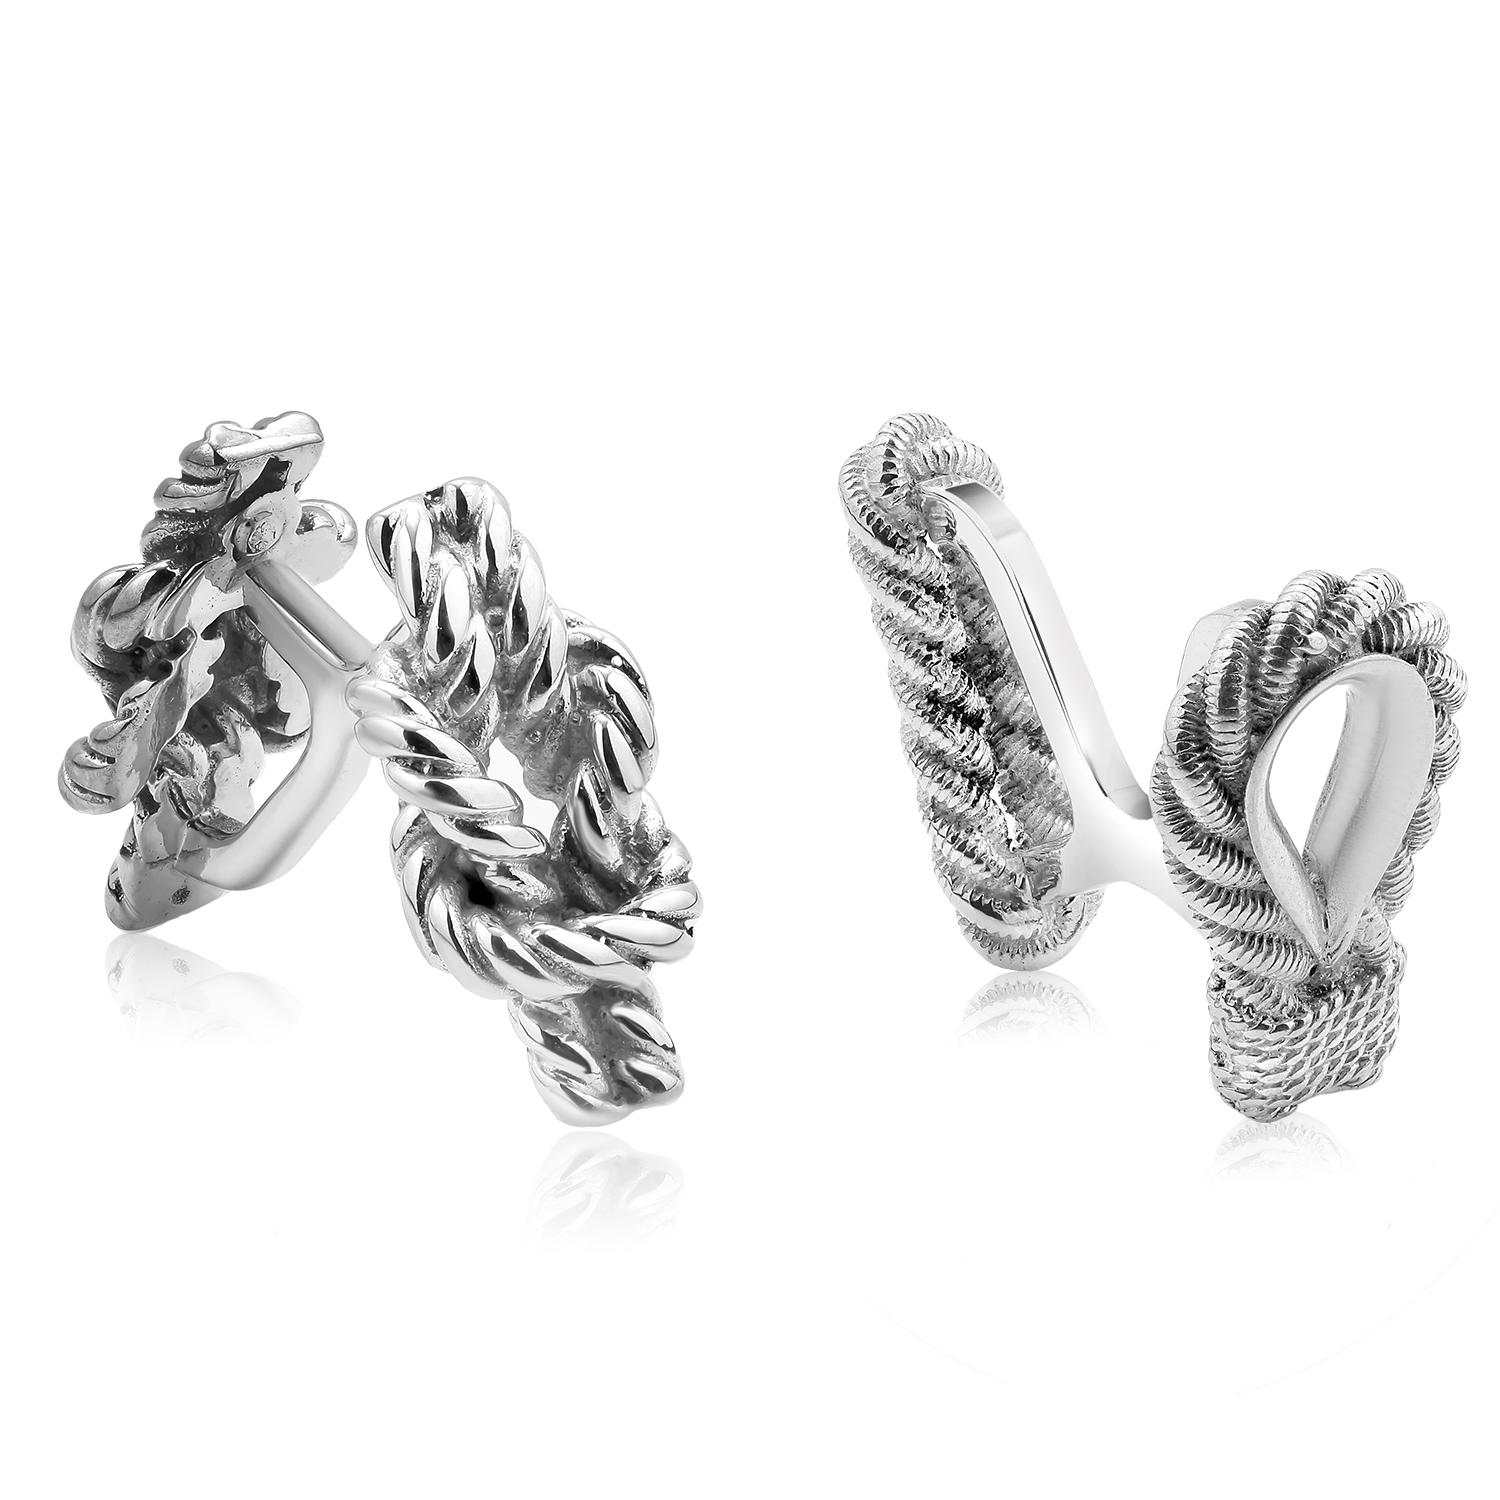 Vintage Hermès Mismatched Silver Cufflinks Stylizing Sailor Knots Twisted Loop In Good Condition For Sale In New York, NY